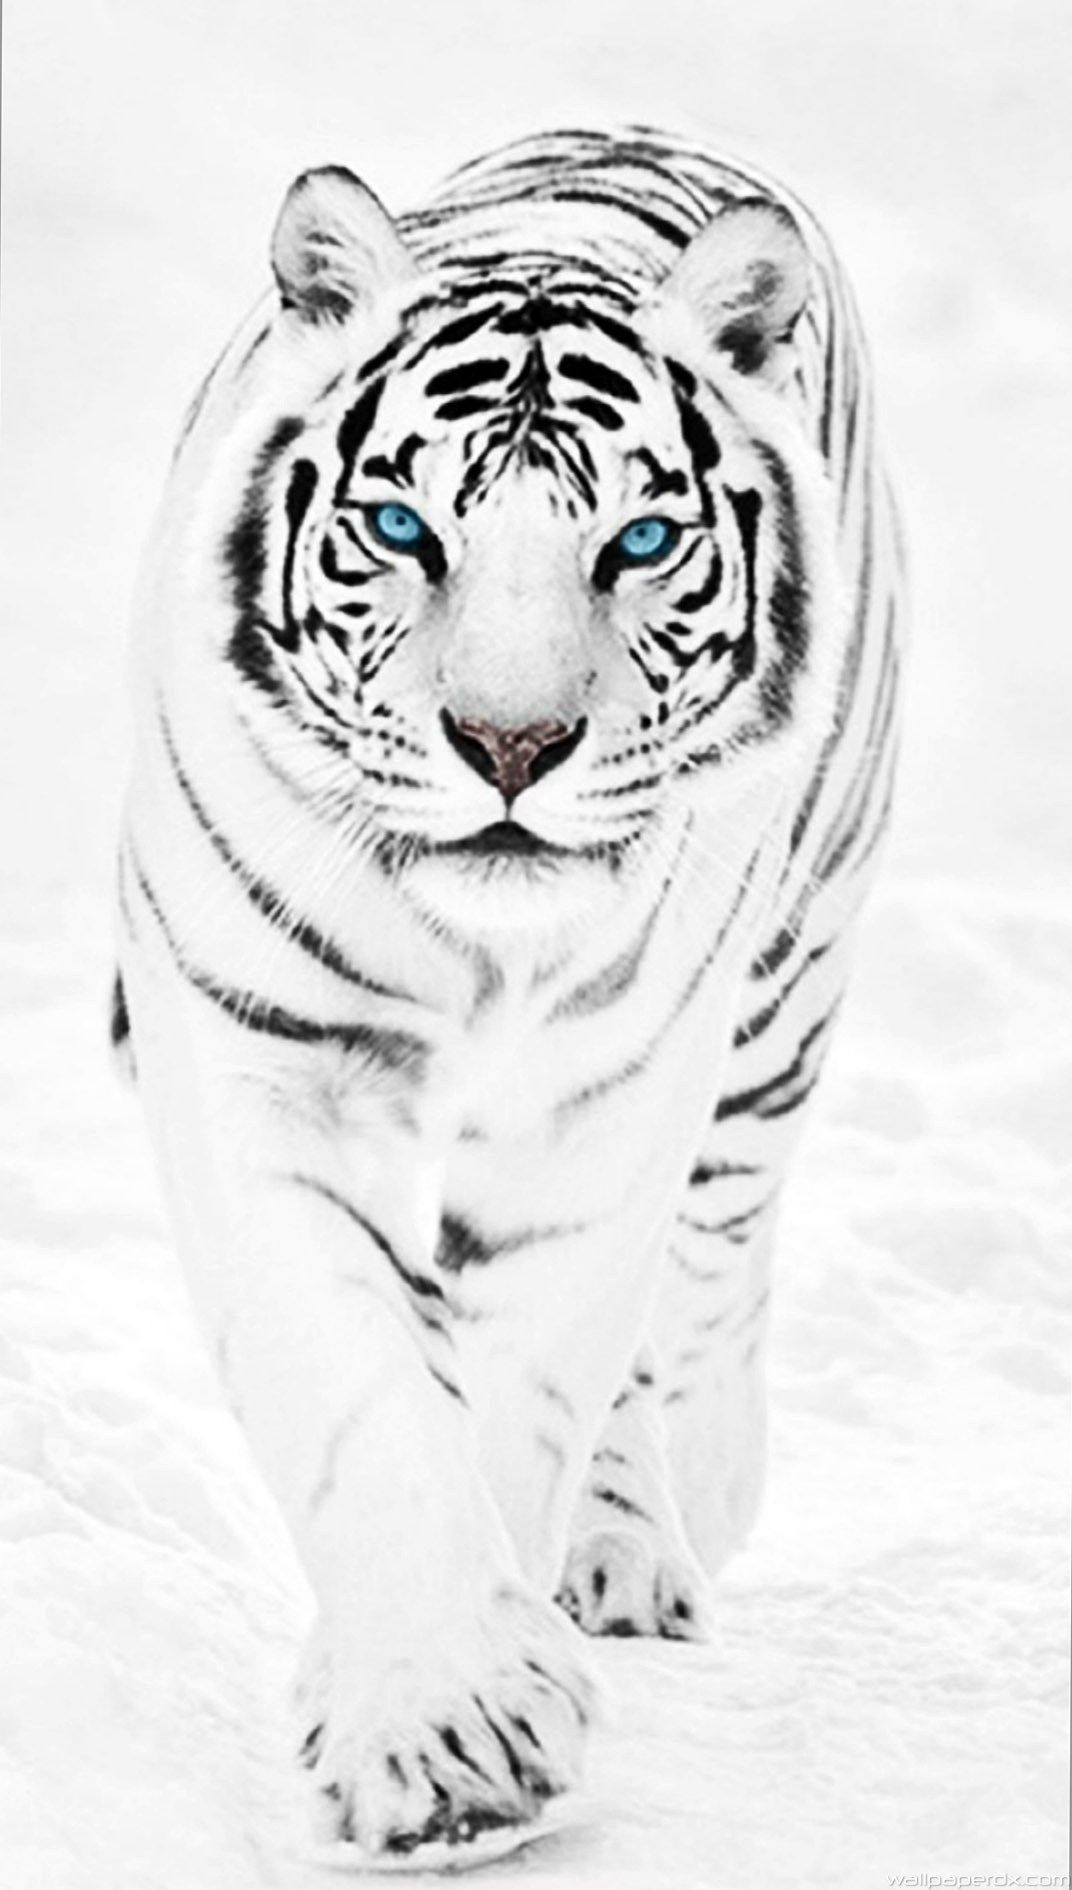 White Tiger Iphone Wallpapers